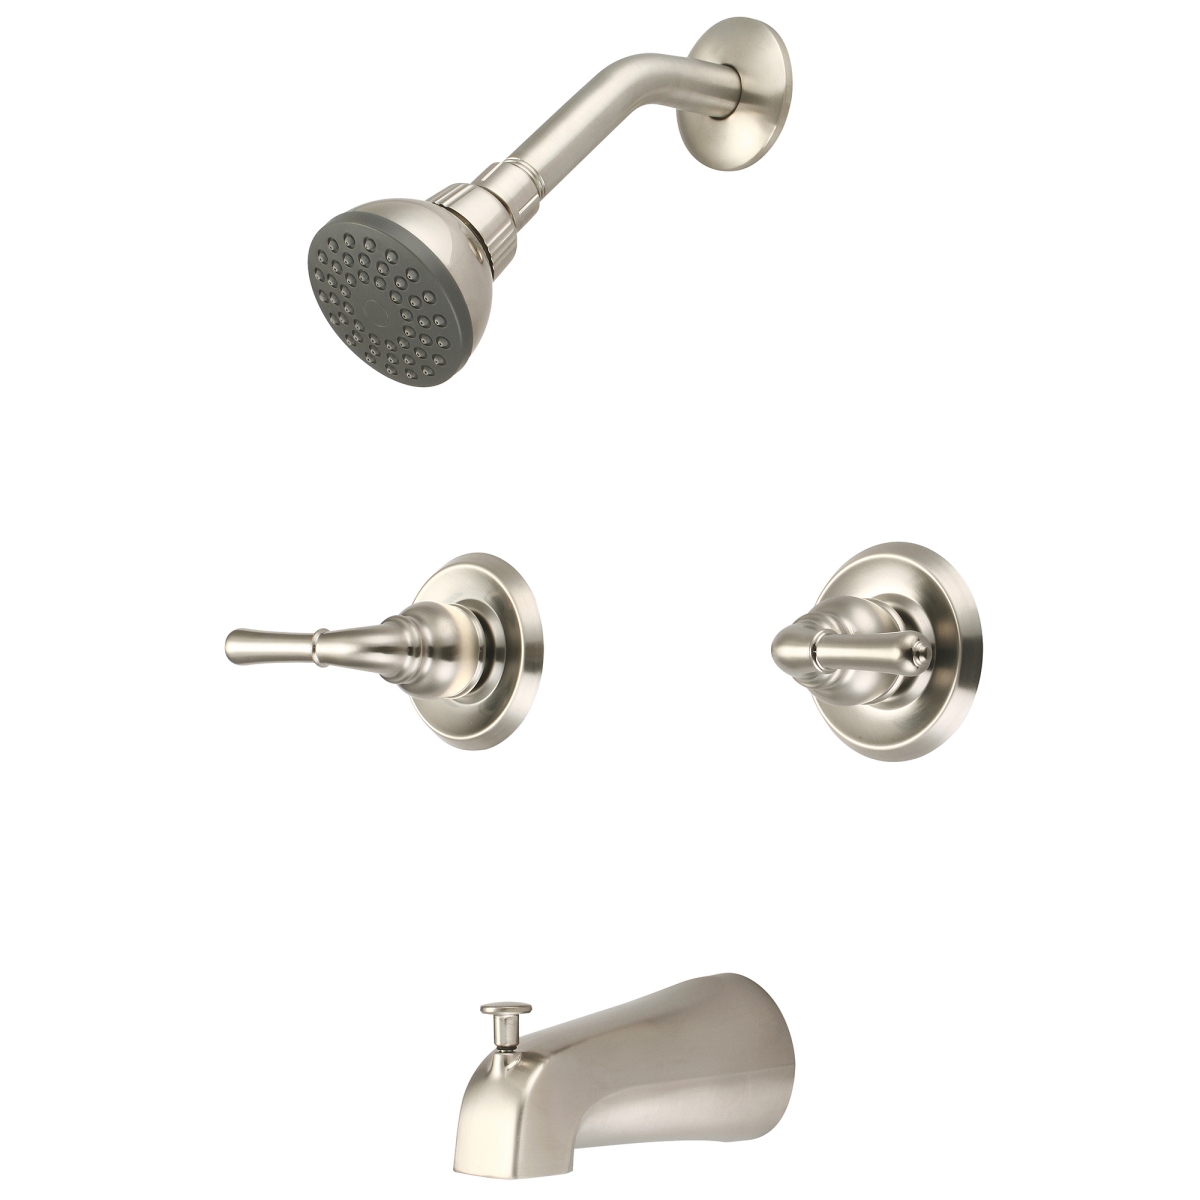 Picture of Elite P-1230-BN Two Handle Tub & Shower Set - Brushed Nickel